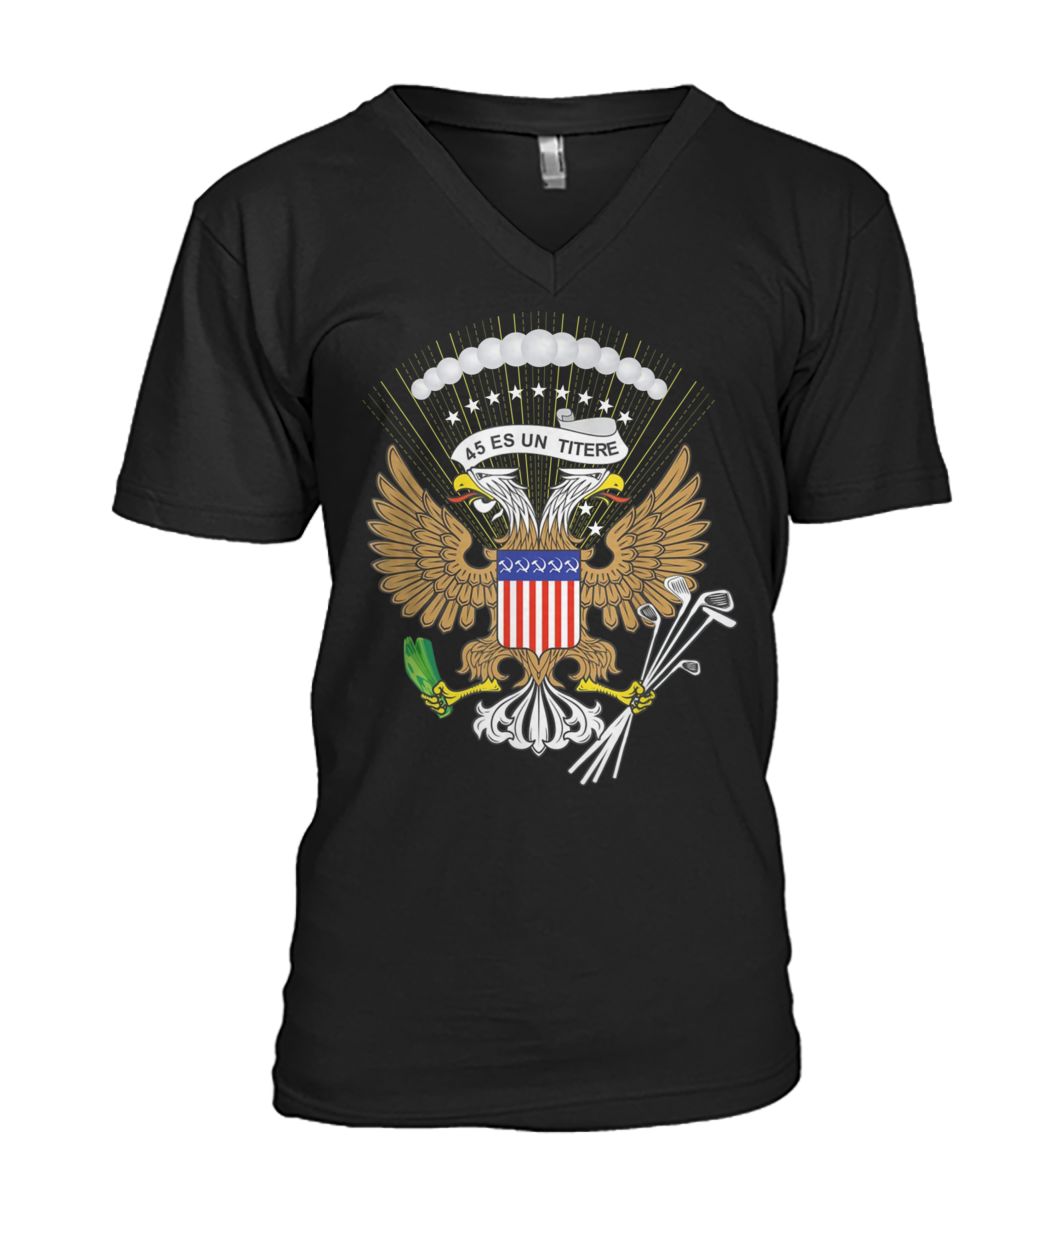 Trump fake russian presidential seal 45 is a puppet political mens v-neck